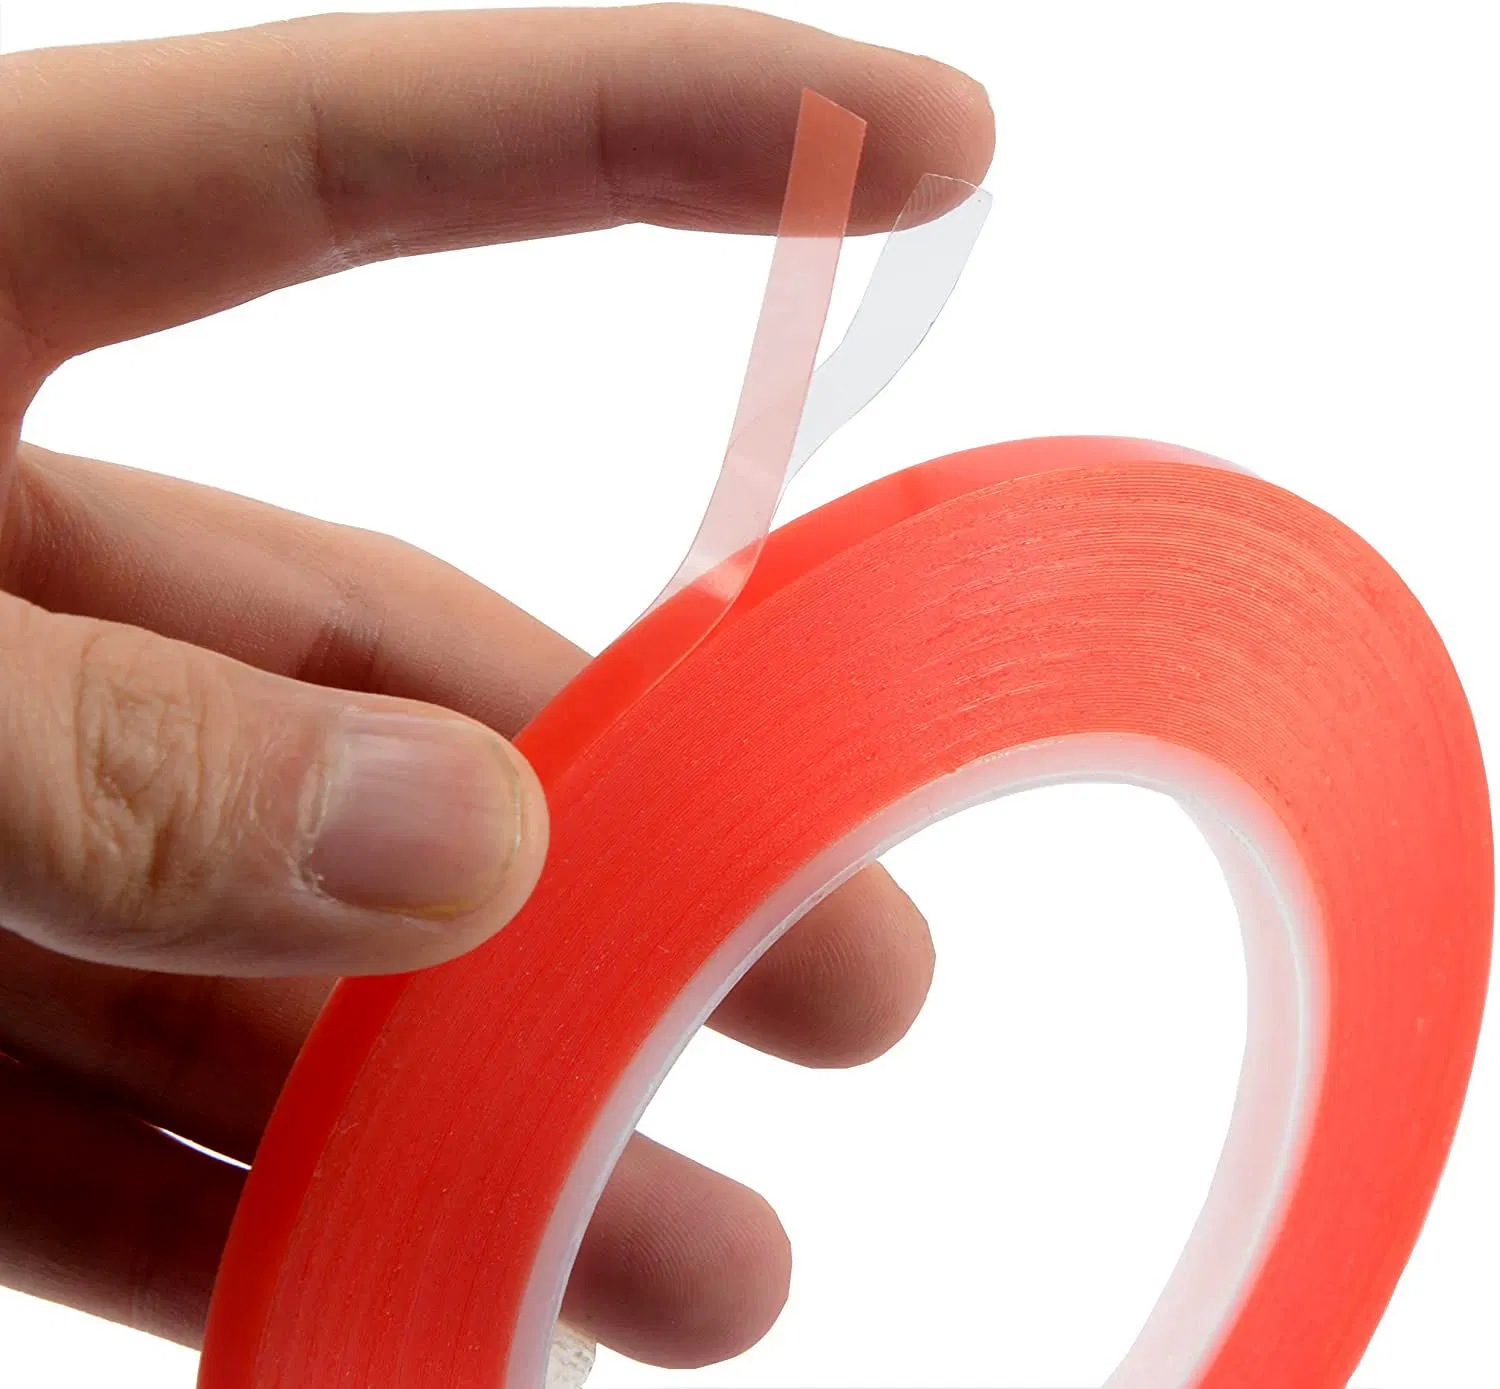 Red Liner Tape LCD Screen Repair Sticker 3mm 5mm Double-Sided Pet Adhesive Tape